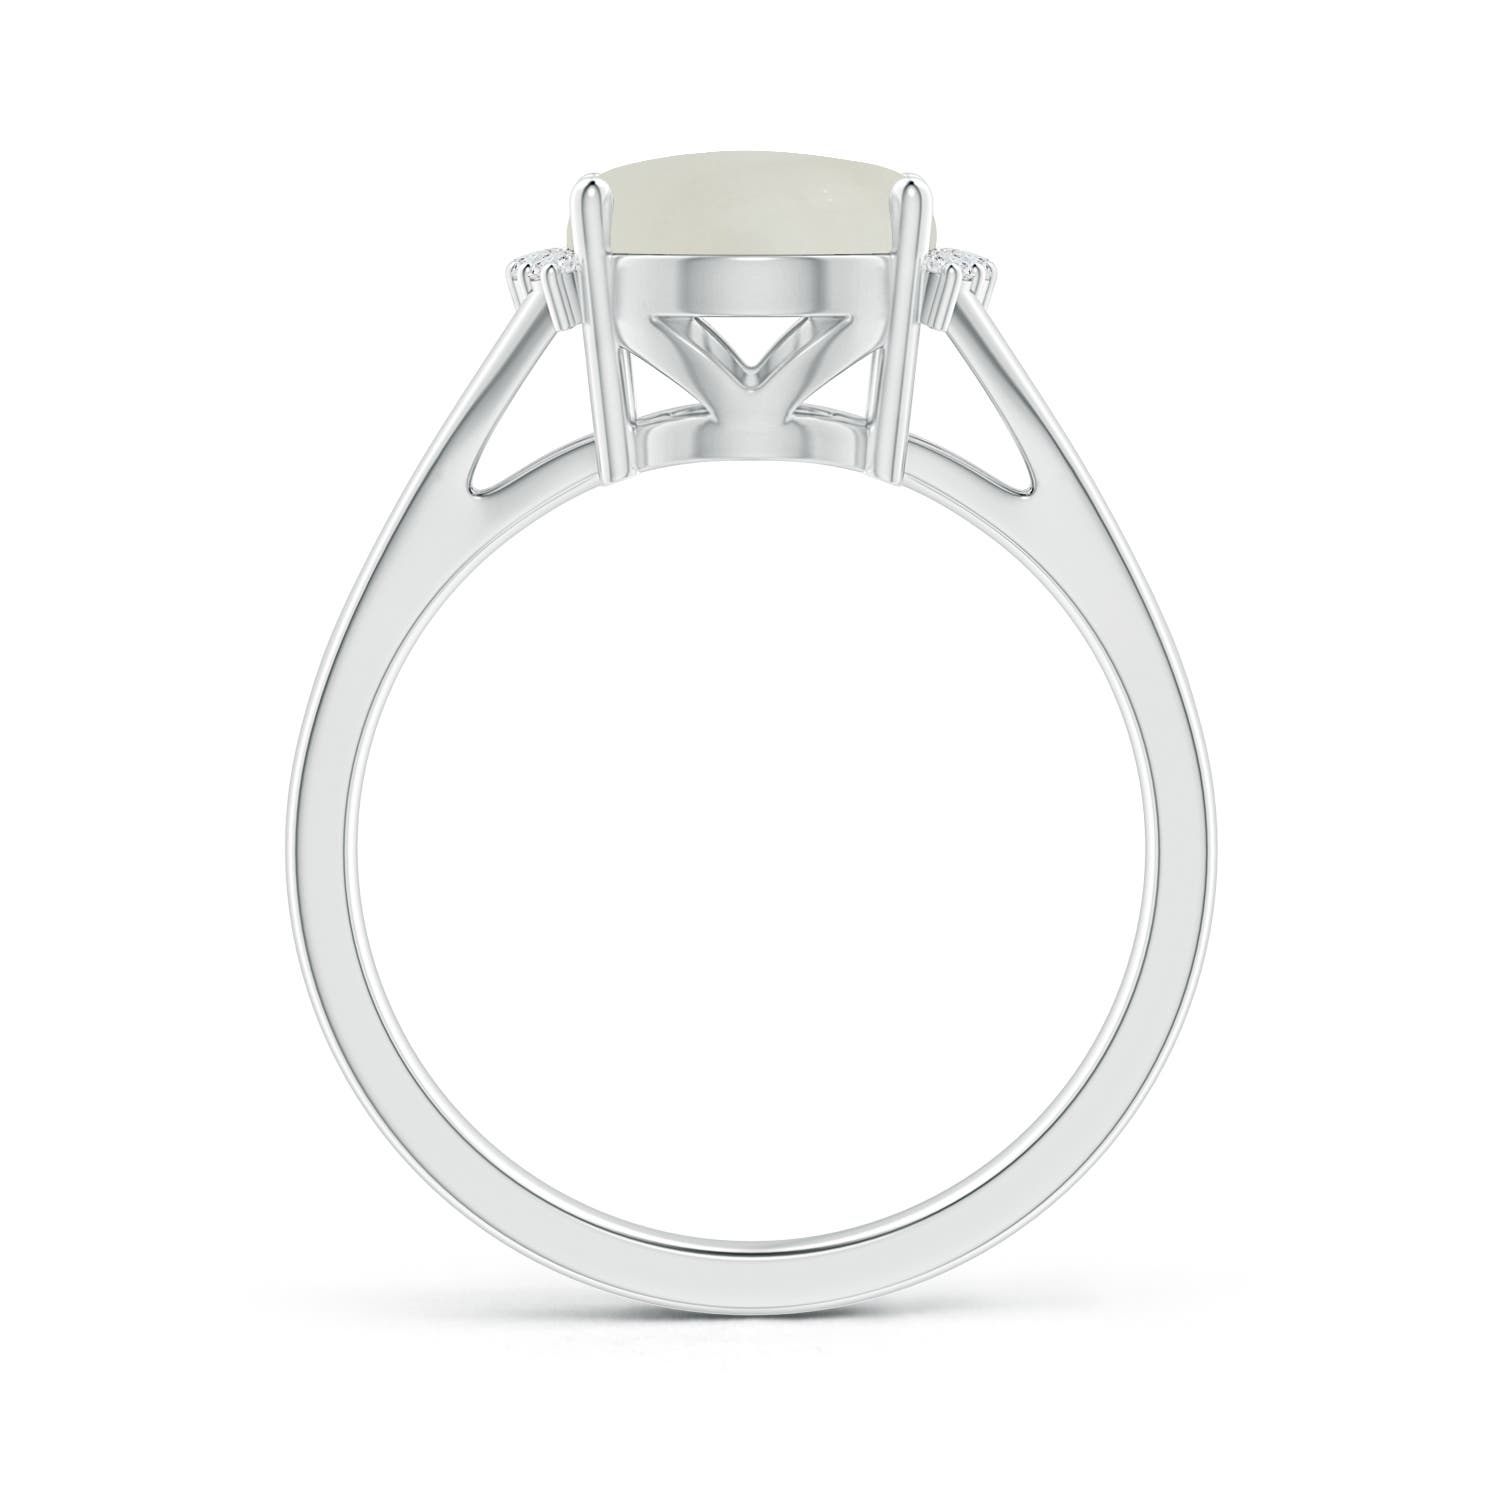 AAA - Moonstone / 2.6 CT / 14 KT White Gold